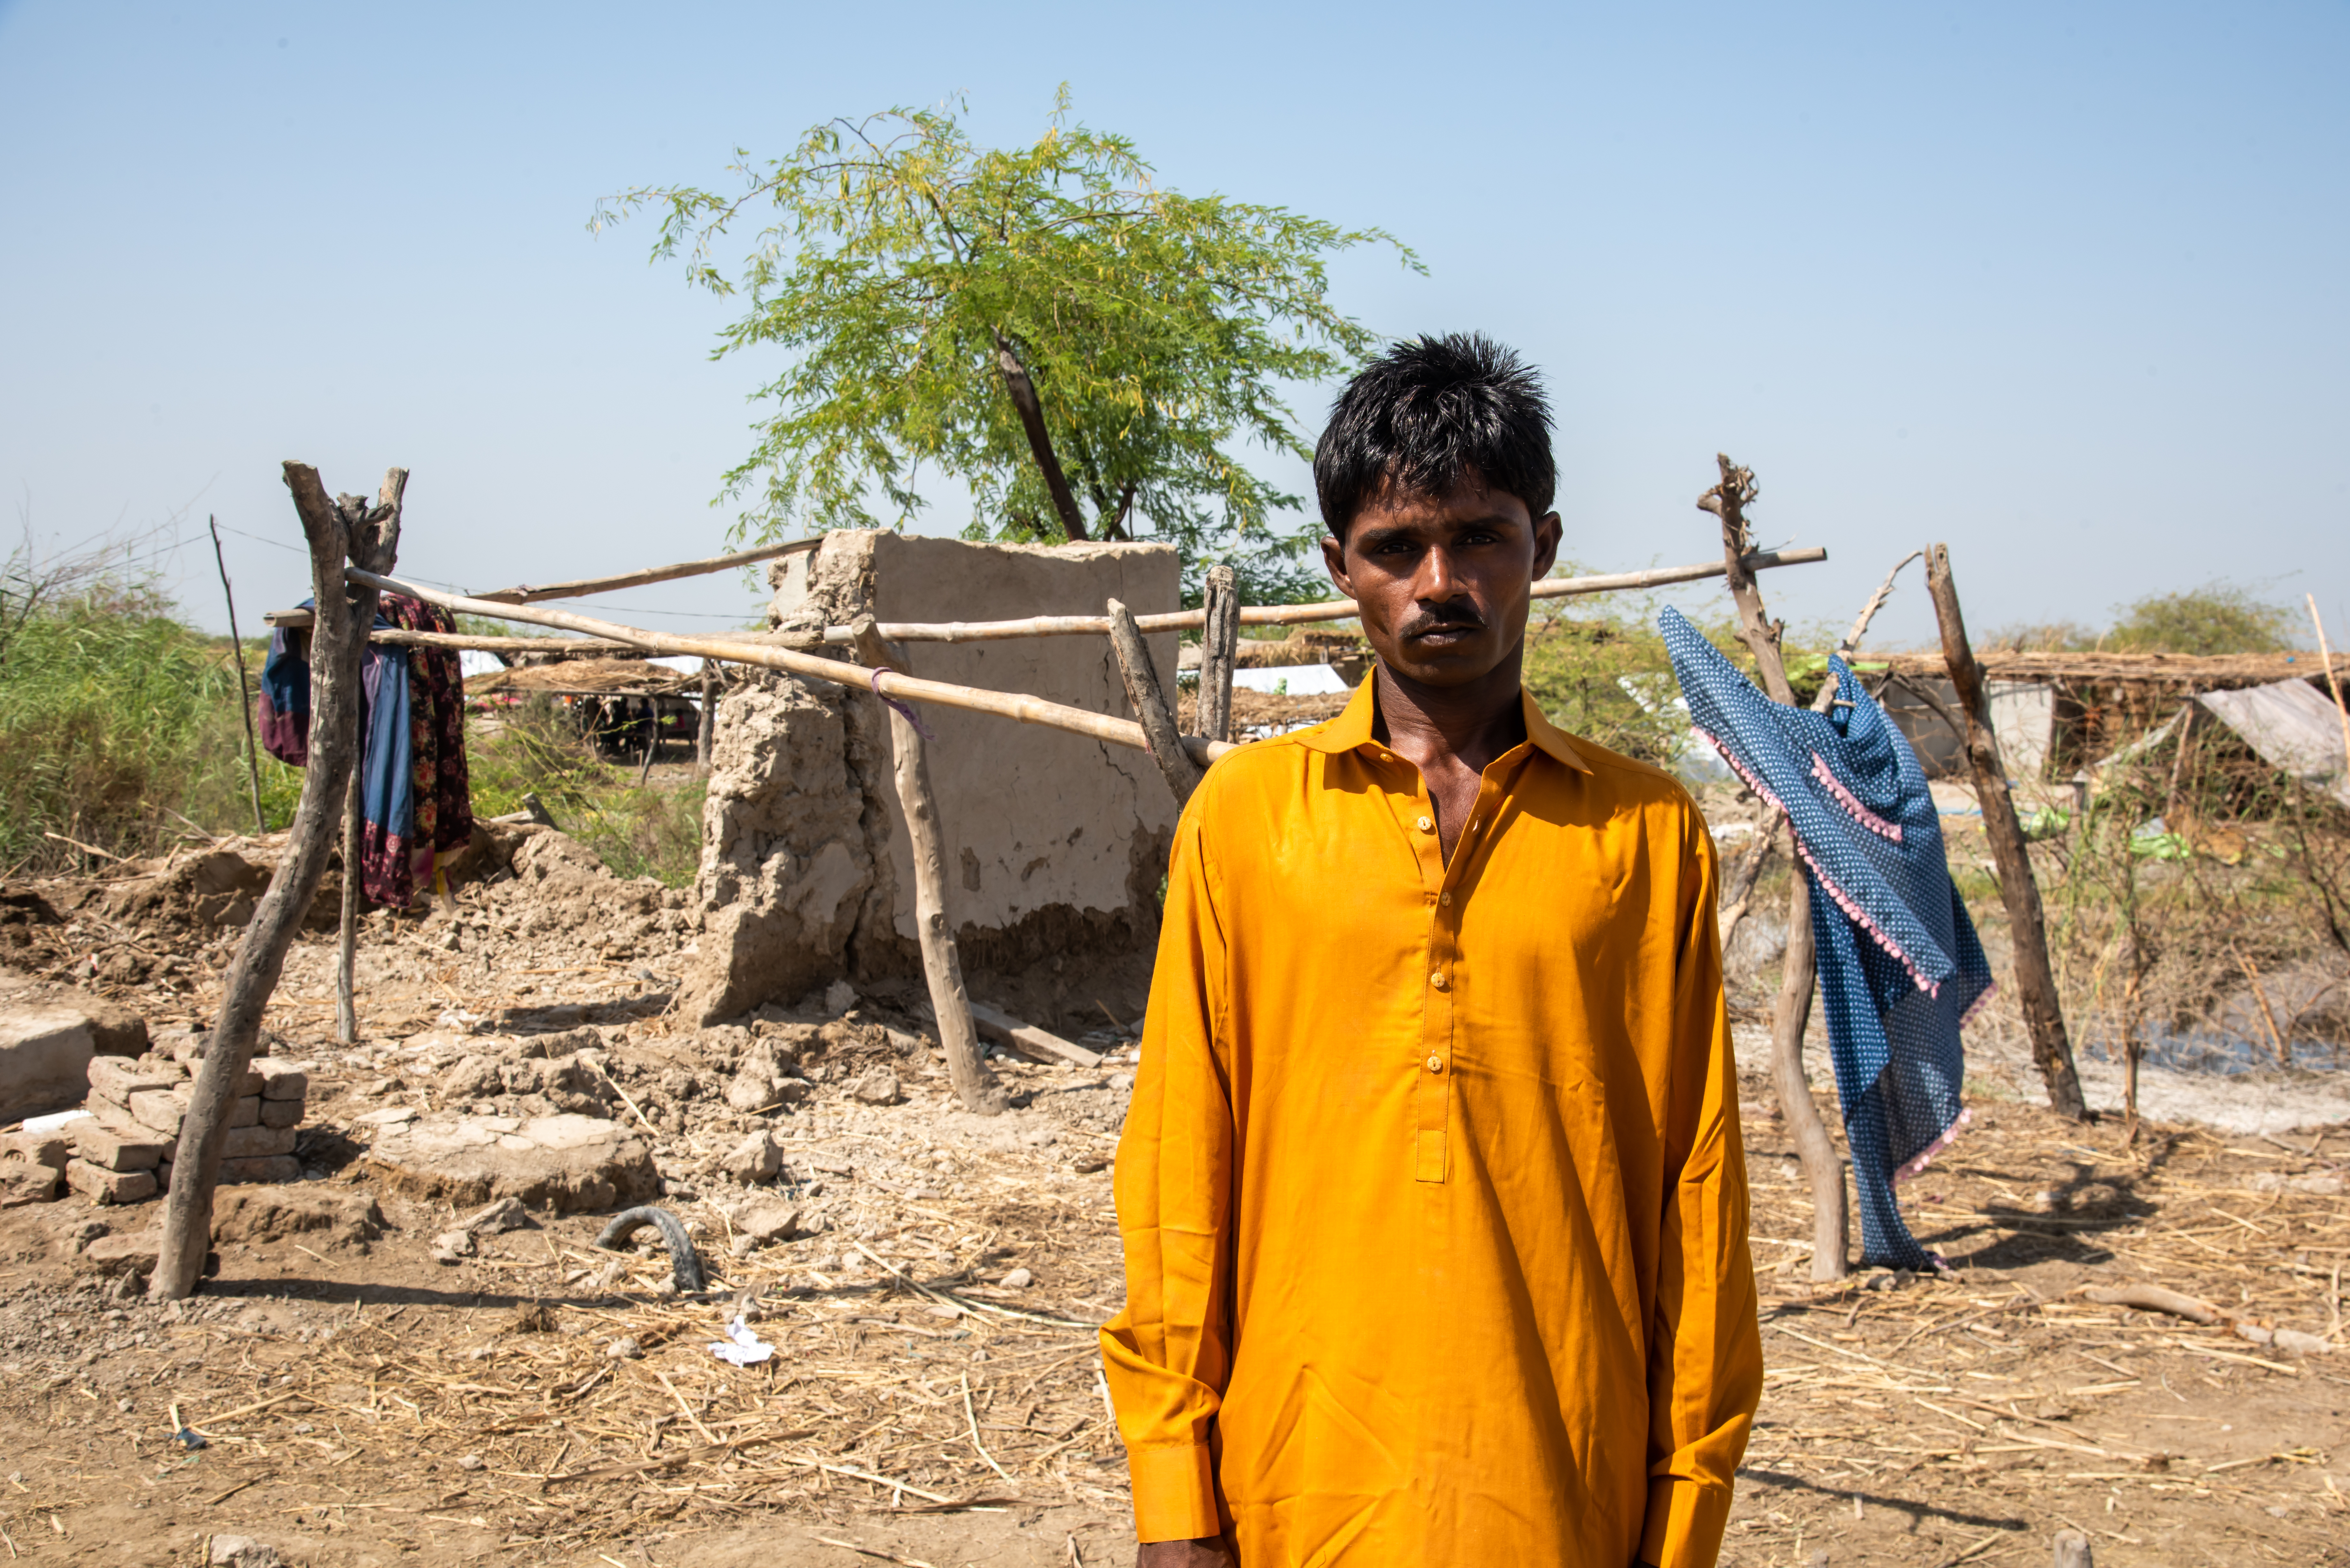 "Rebuilding is meaningless if I have to do it over and over again." Arjun recounts how his house in district Badin has been completely destroyed thrice due to the floods. The constant cycle of destruction and rebuilding has left him feeling anxious and overwhelmed.